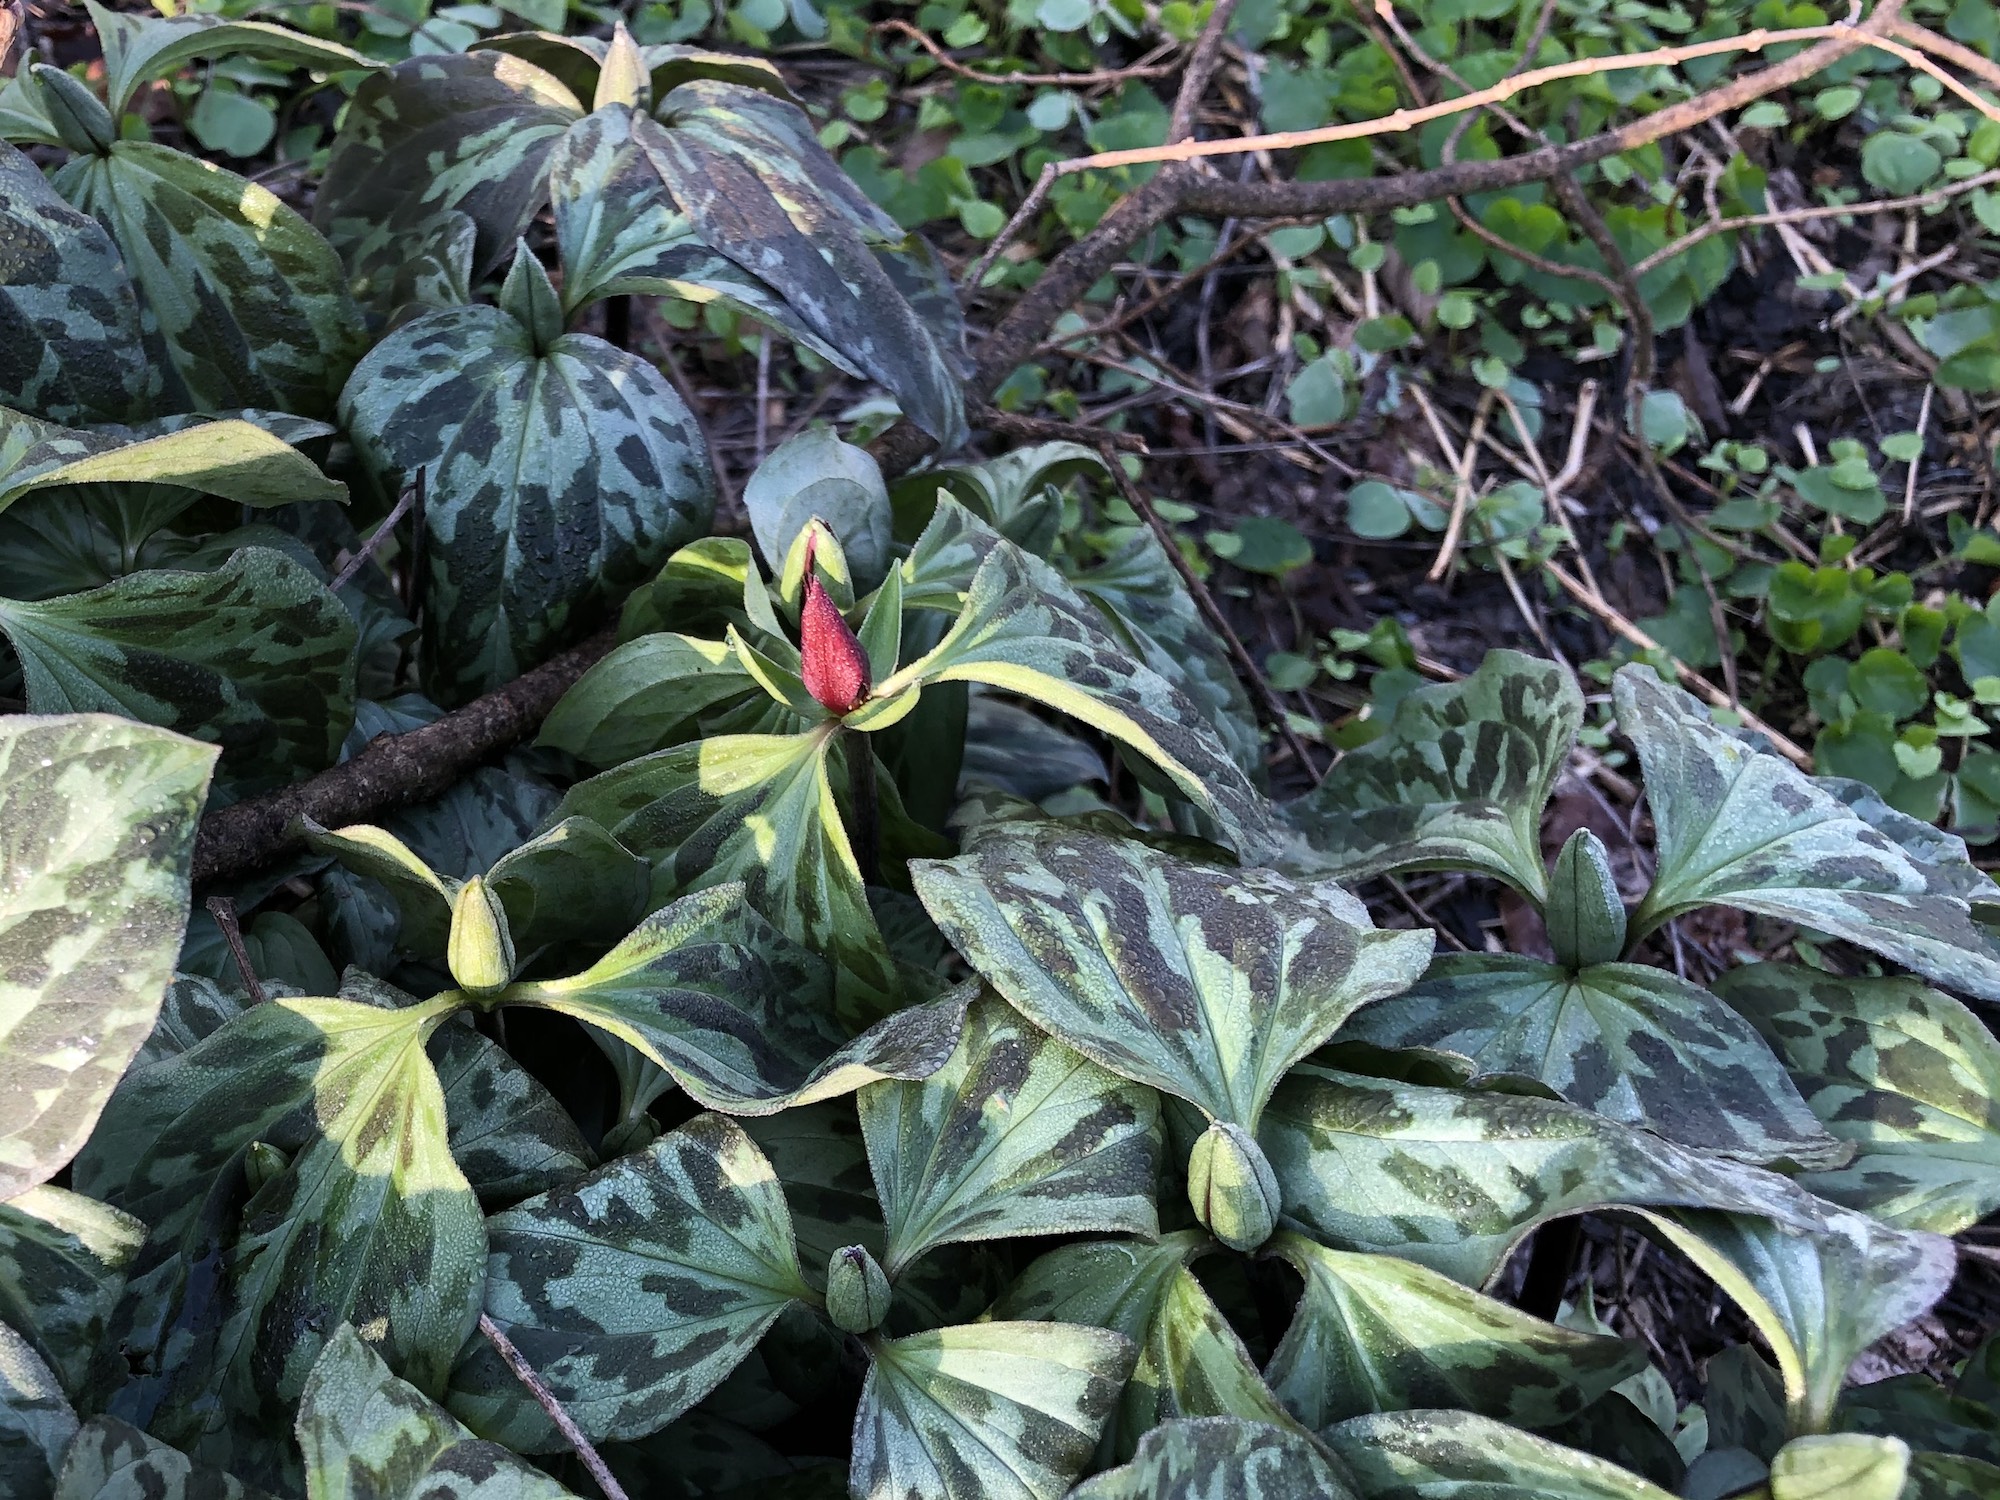 Trillium off of bike path between Marion Dunn and Duck Pond on April 24, 2019.